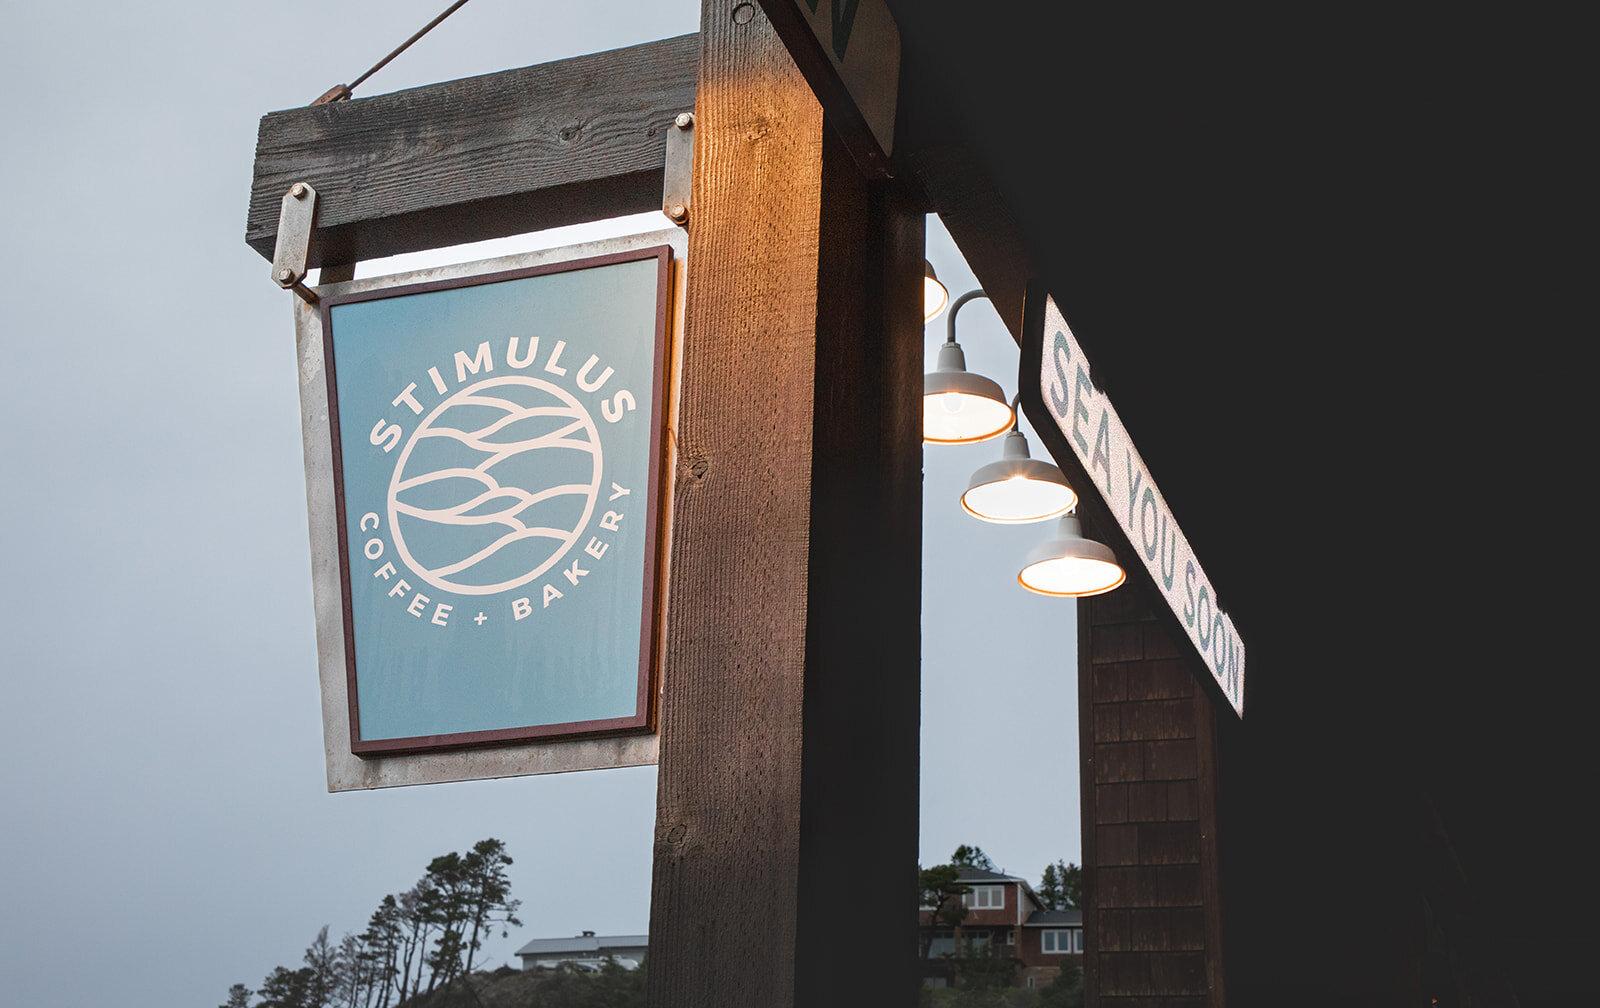 Embrace the peaceful solitude of moody mornings by the sea, where the waves whisper secrets and the coffee brews tranquility.

#Stimuluscoffeeandbakery #pacificcityoregon #moodymornings #beachvibes #seayousoon